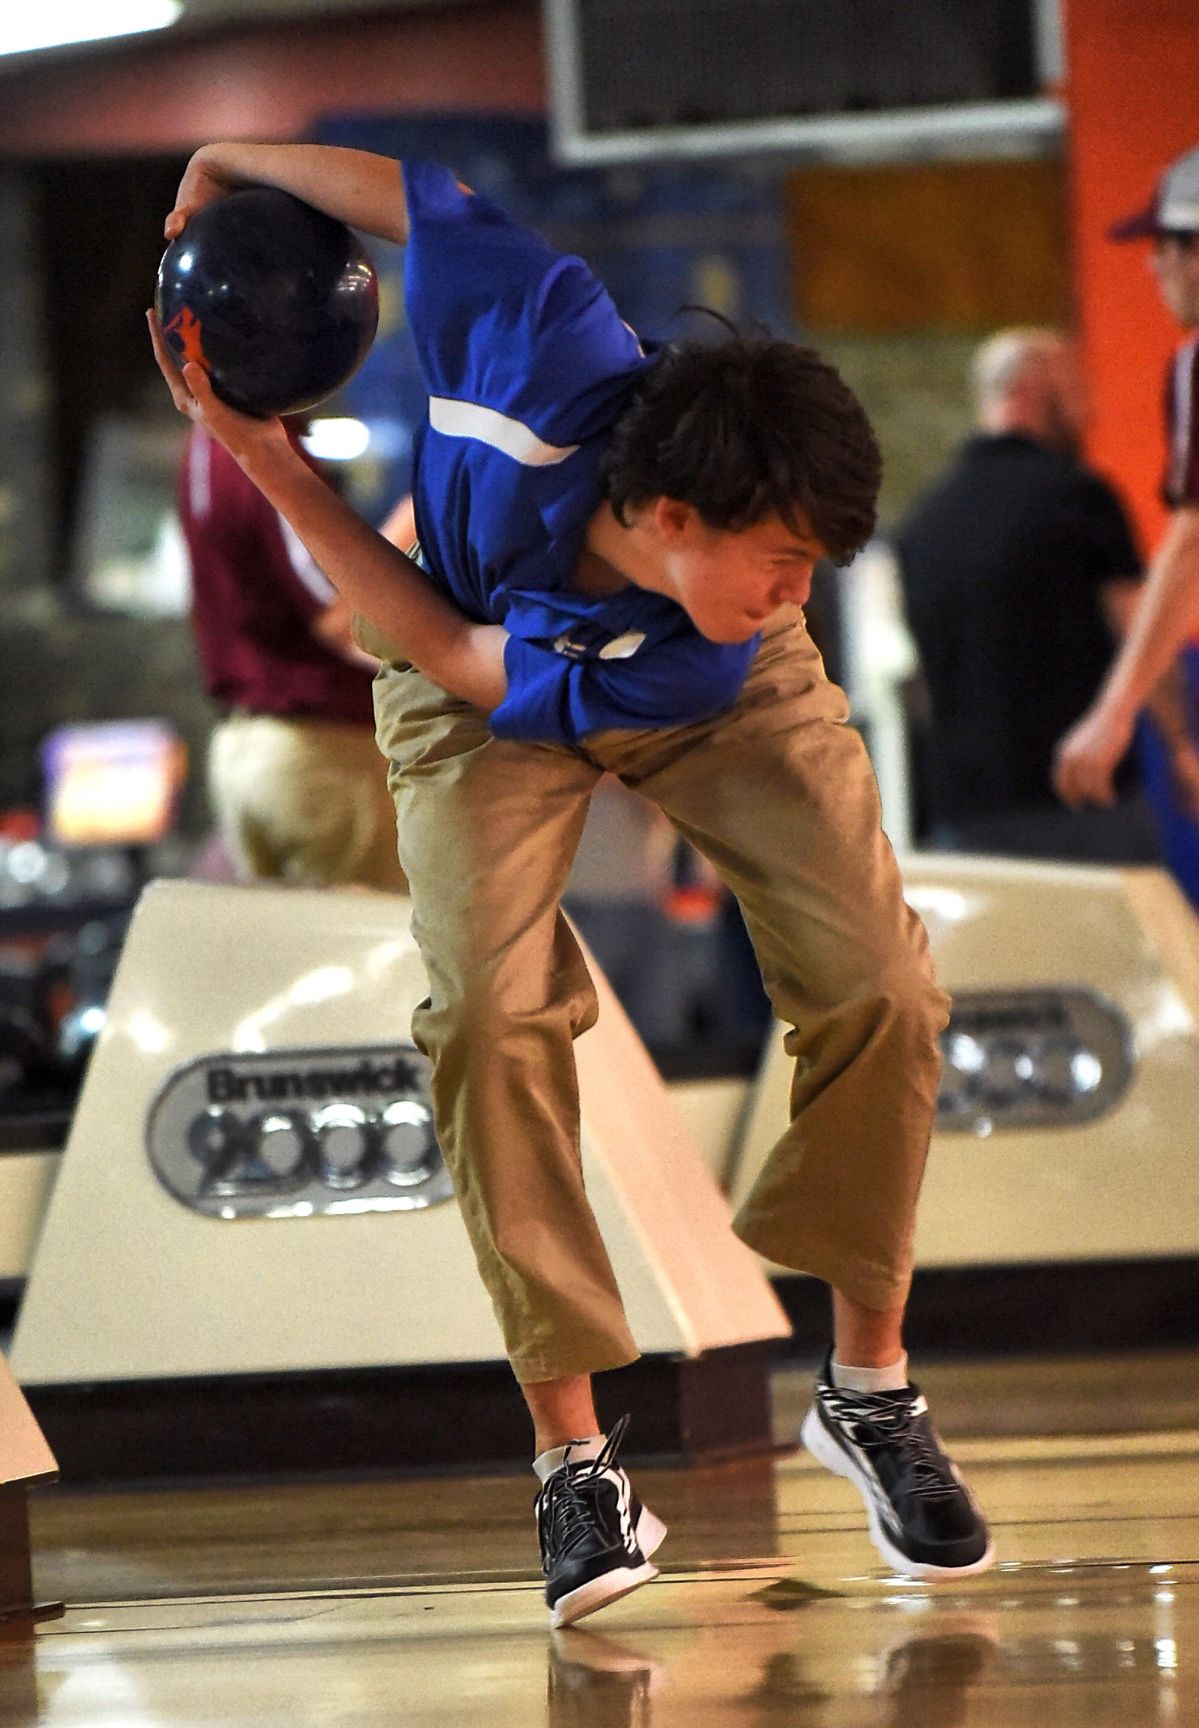 win area bowling title over Northview 